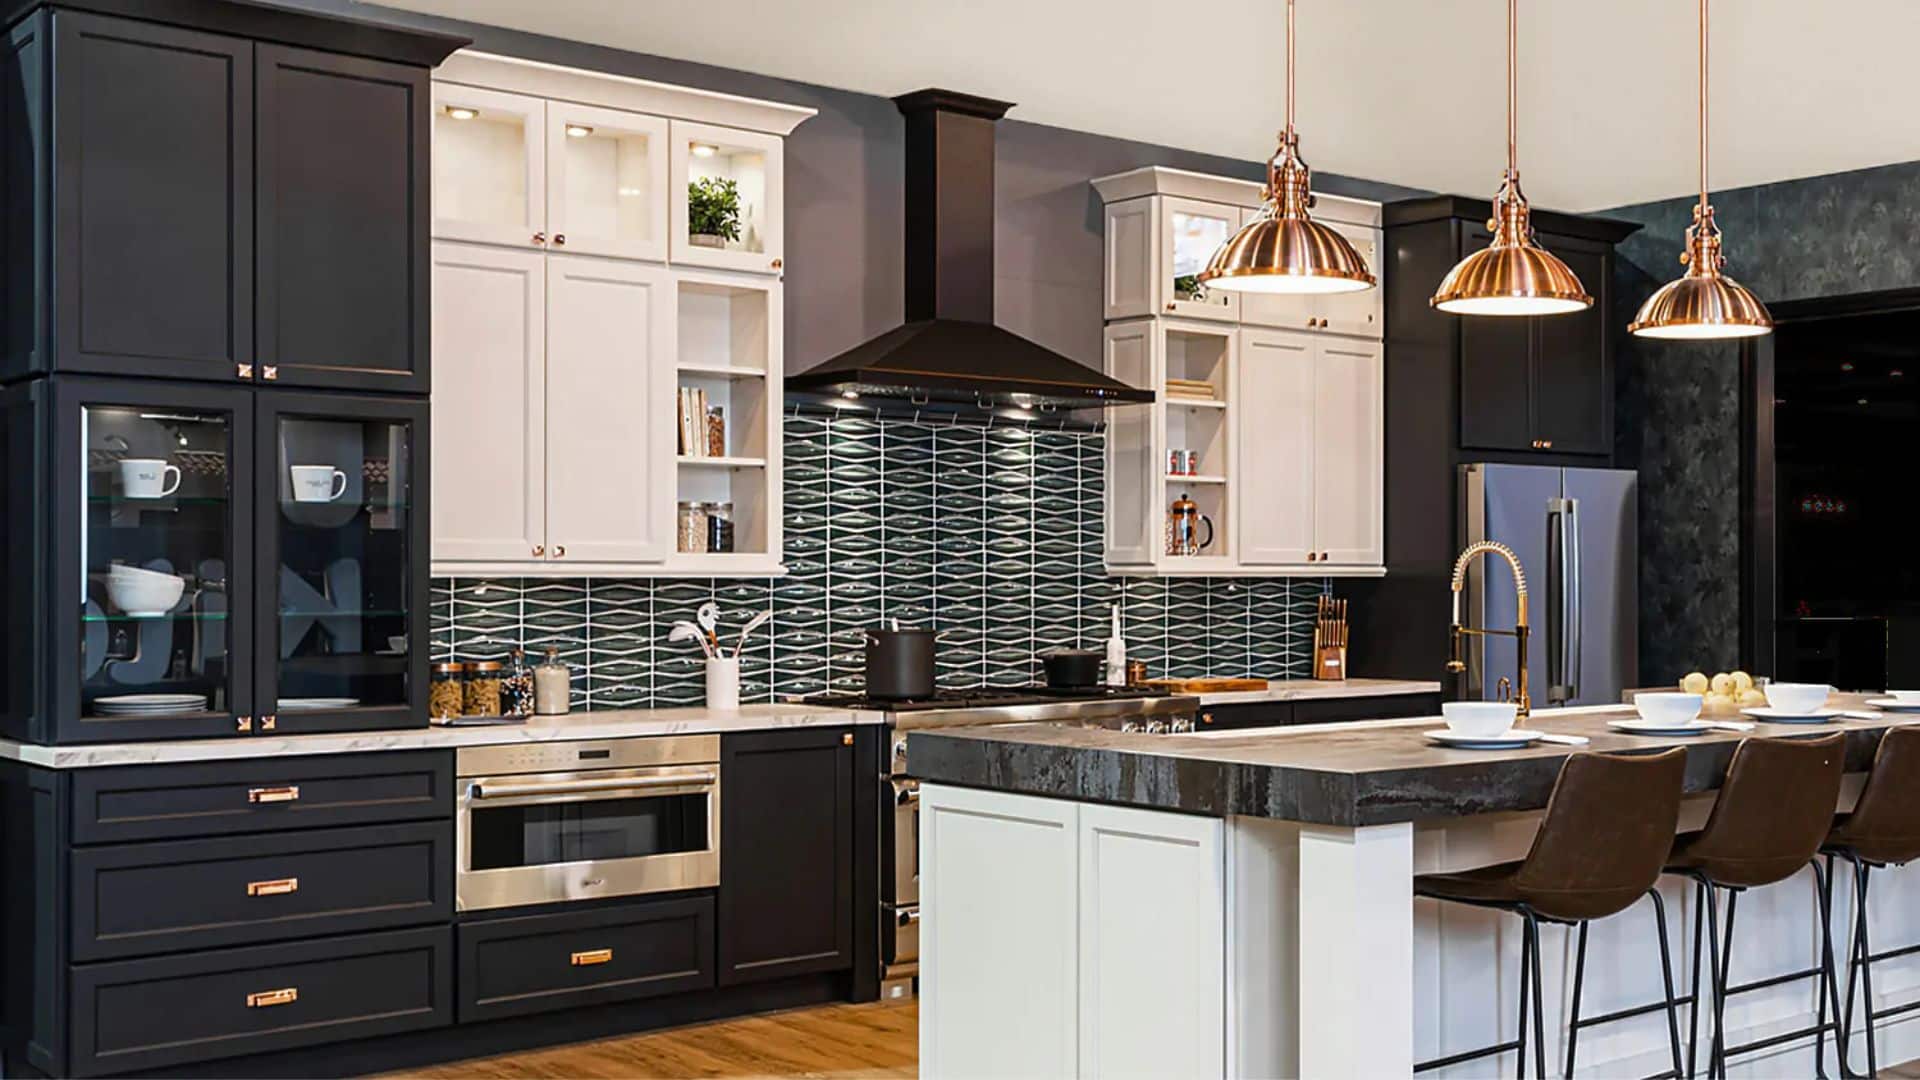 How to Transform Your Kitchen with Trendy Cabinet Designs